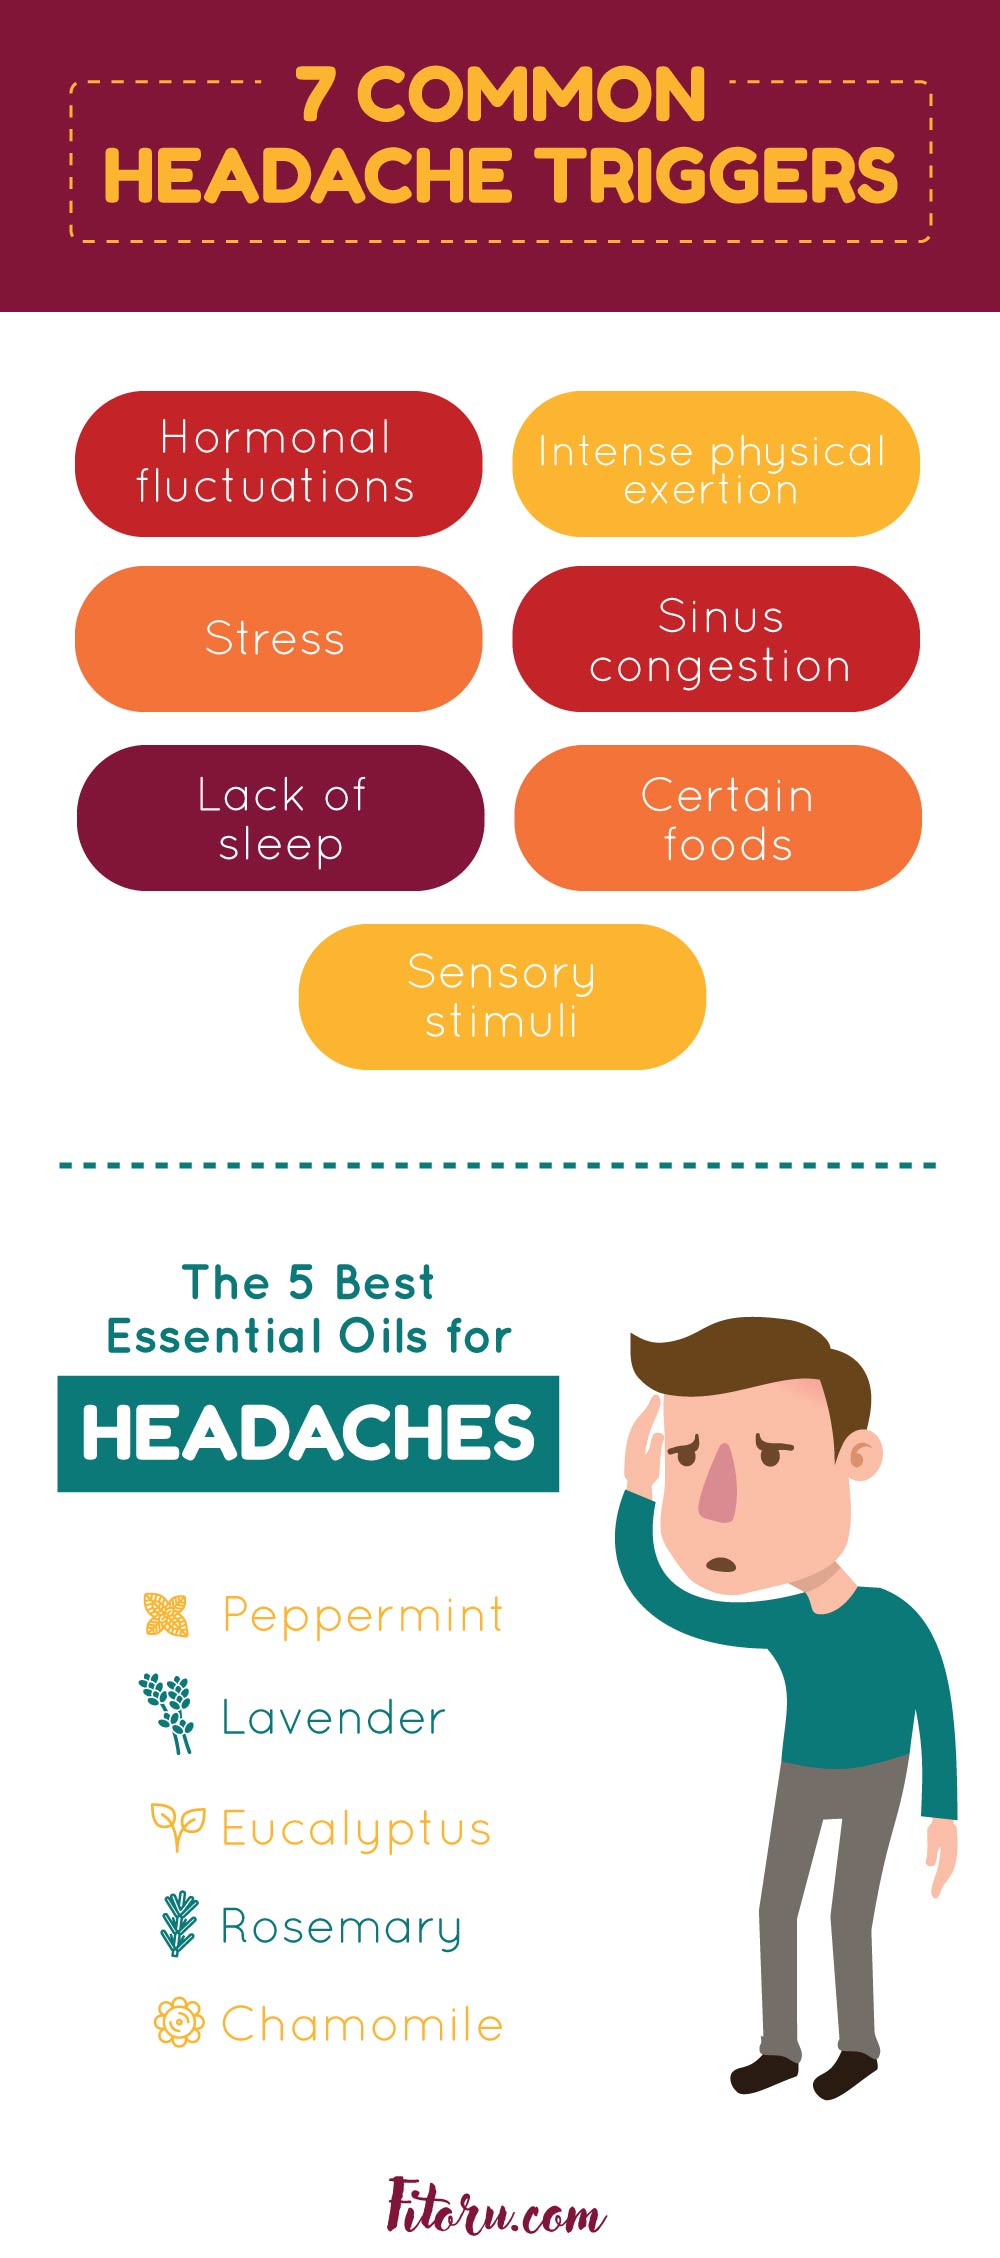 Here are 7 common things that can trigger headaches.